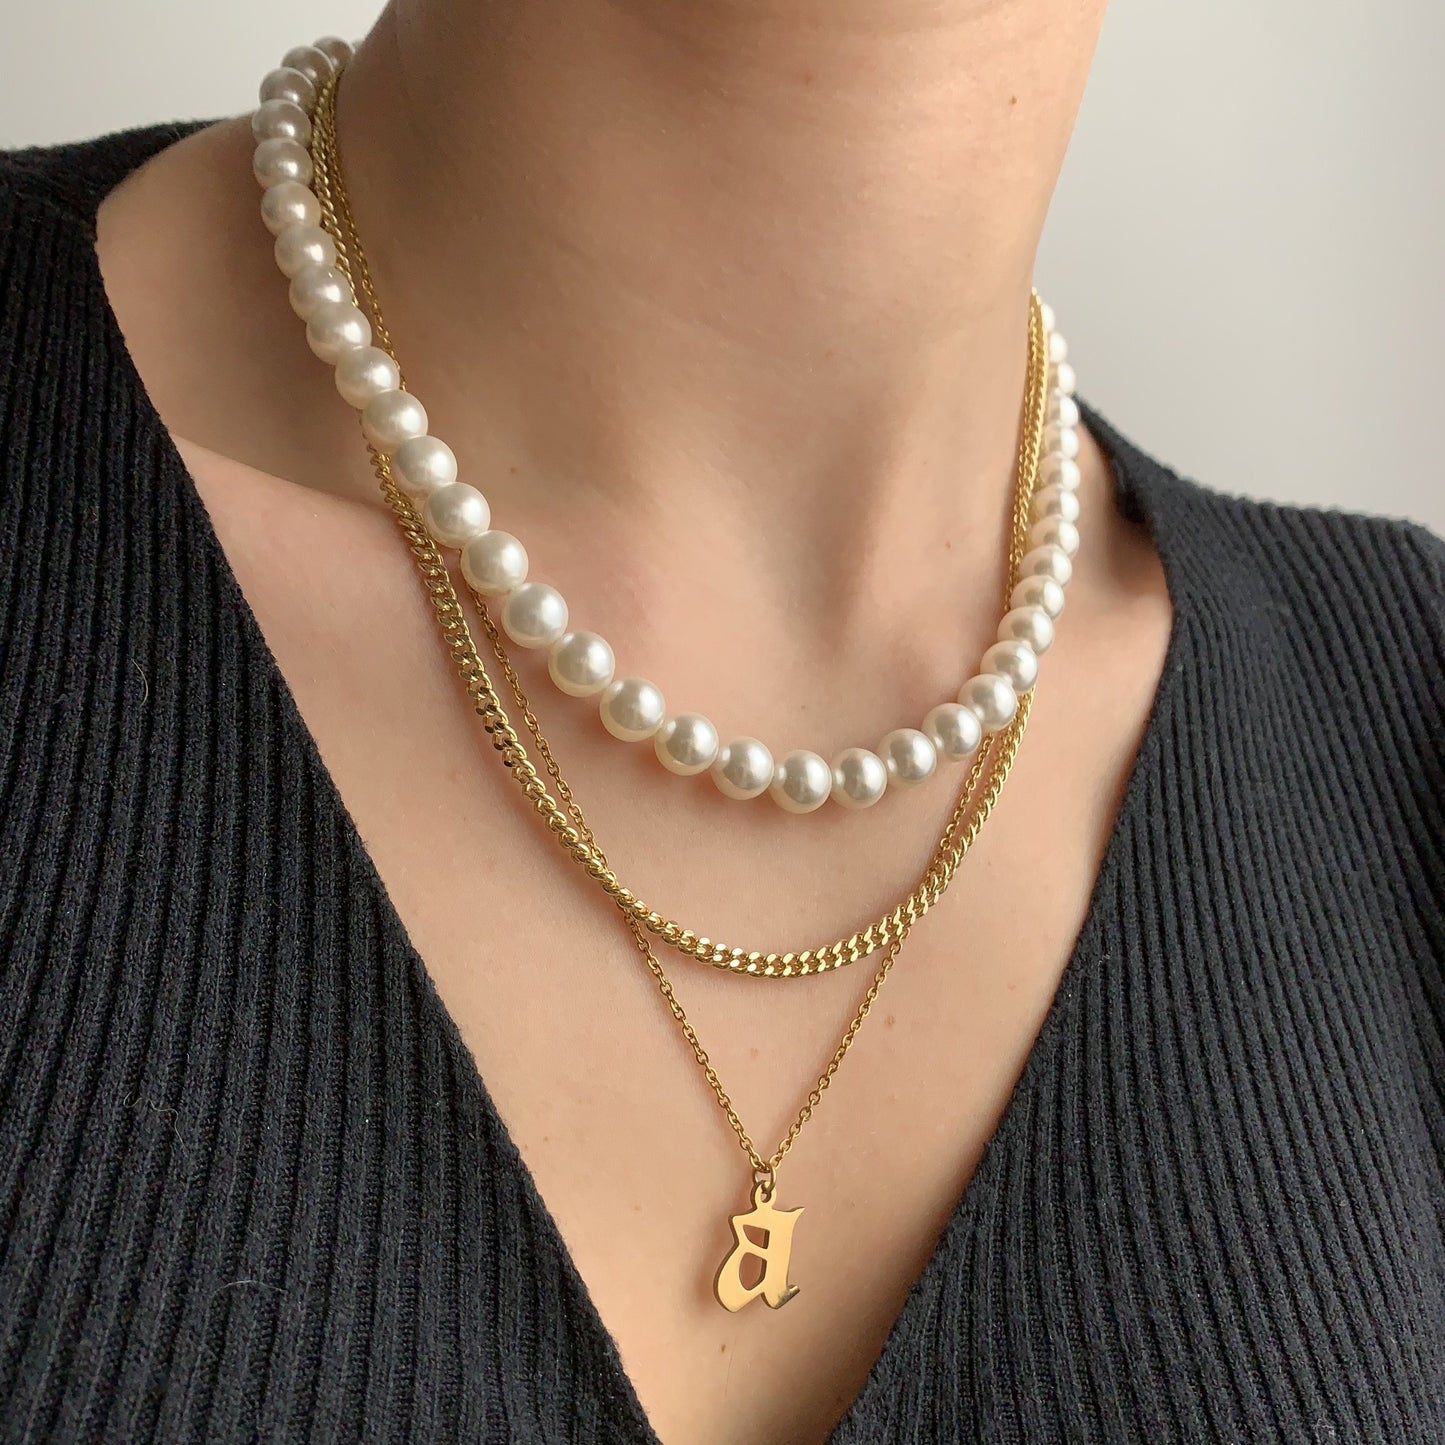 Ivory Queen Necklace